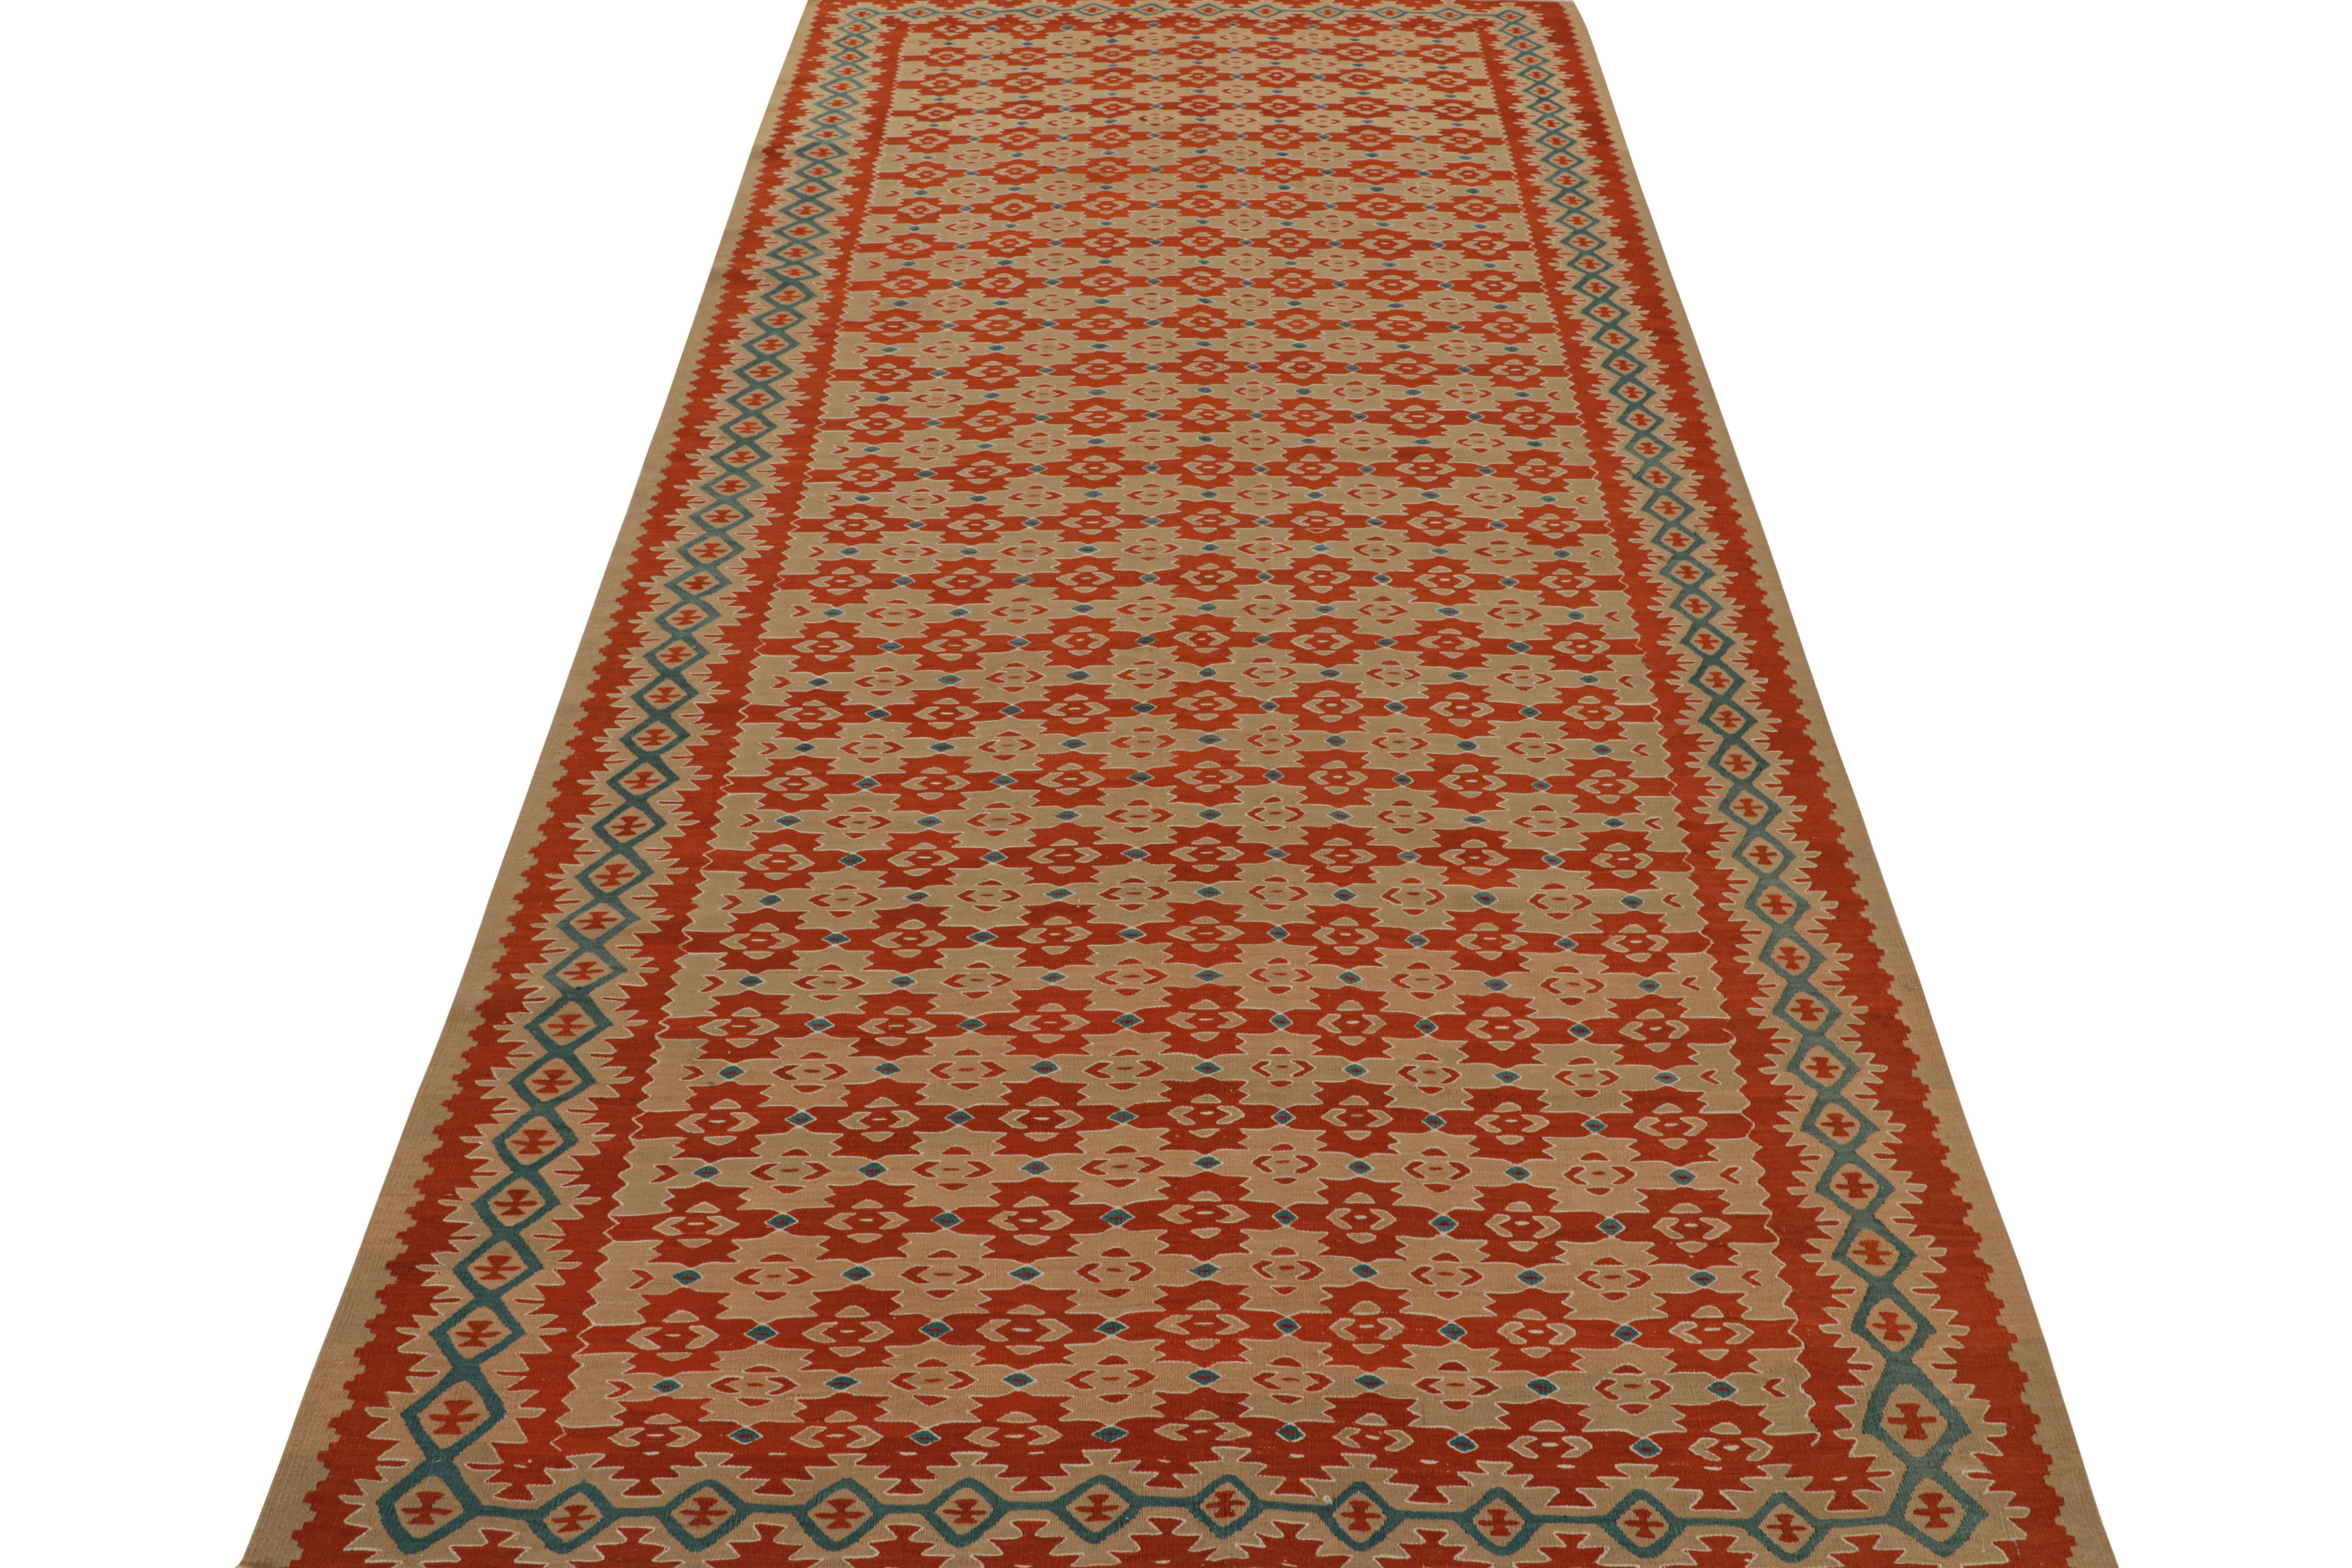 Handwoven Vintage Rug in Orange Beige Geometric All-Over Pattern by Rug & Kilim In Good Condition For Sale In Long Island City, NY